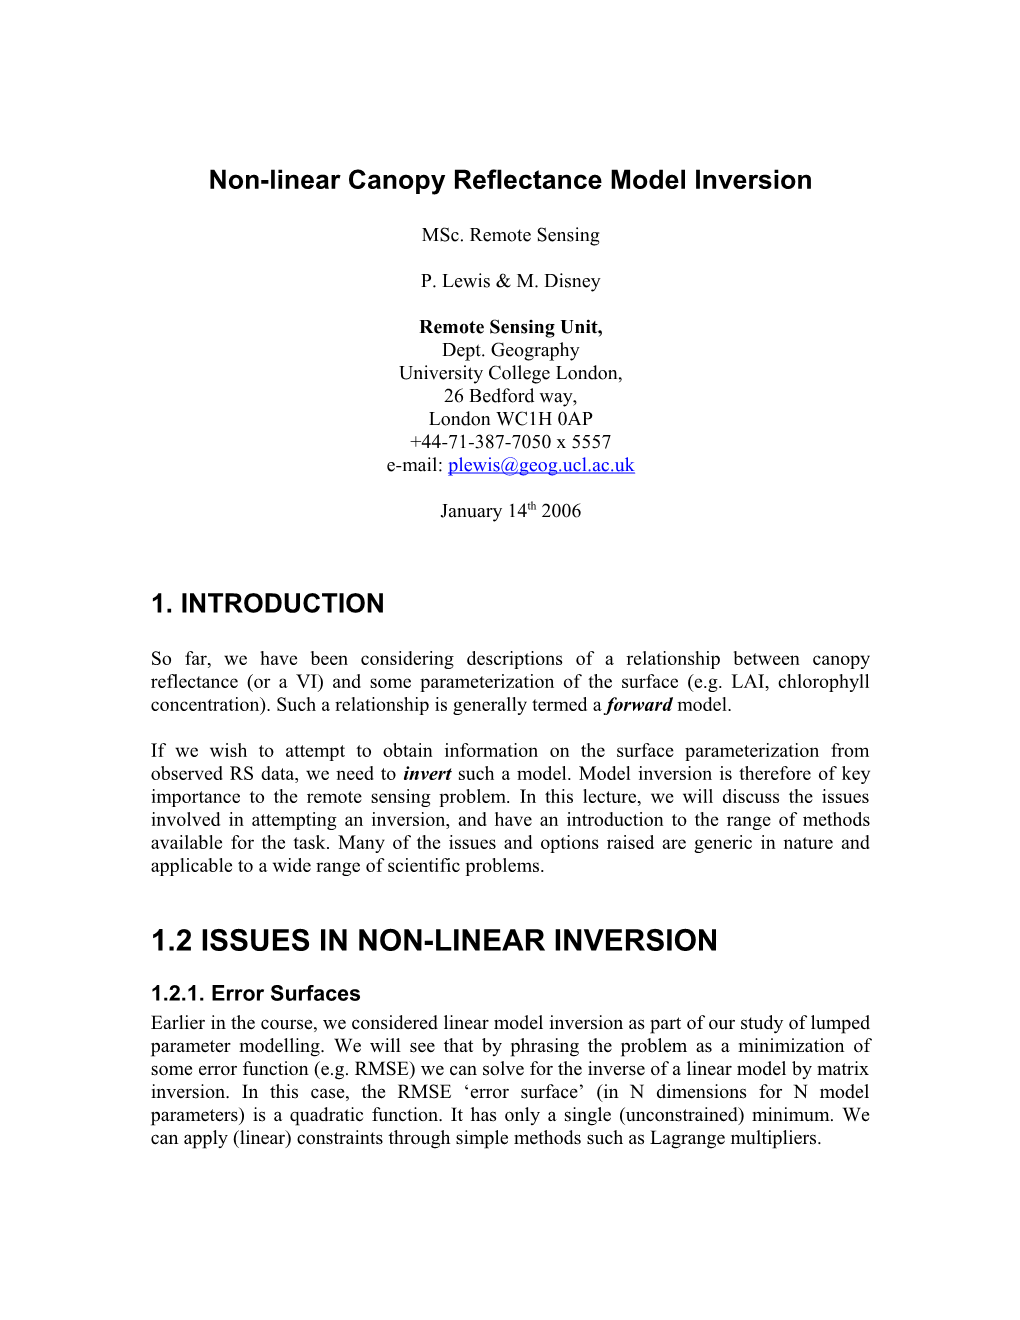 Non-Linear Canopy Reflectance Model Inversion